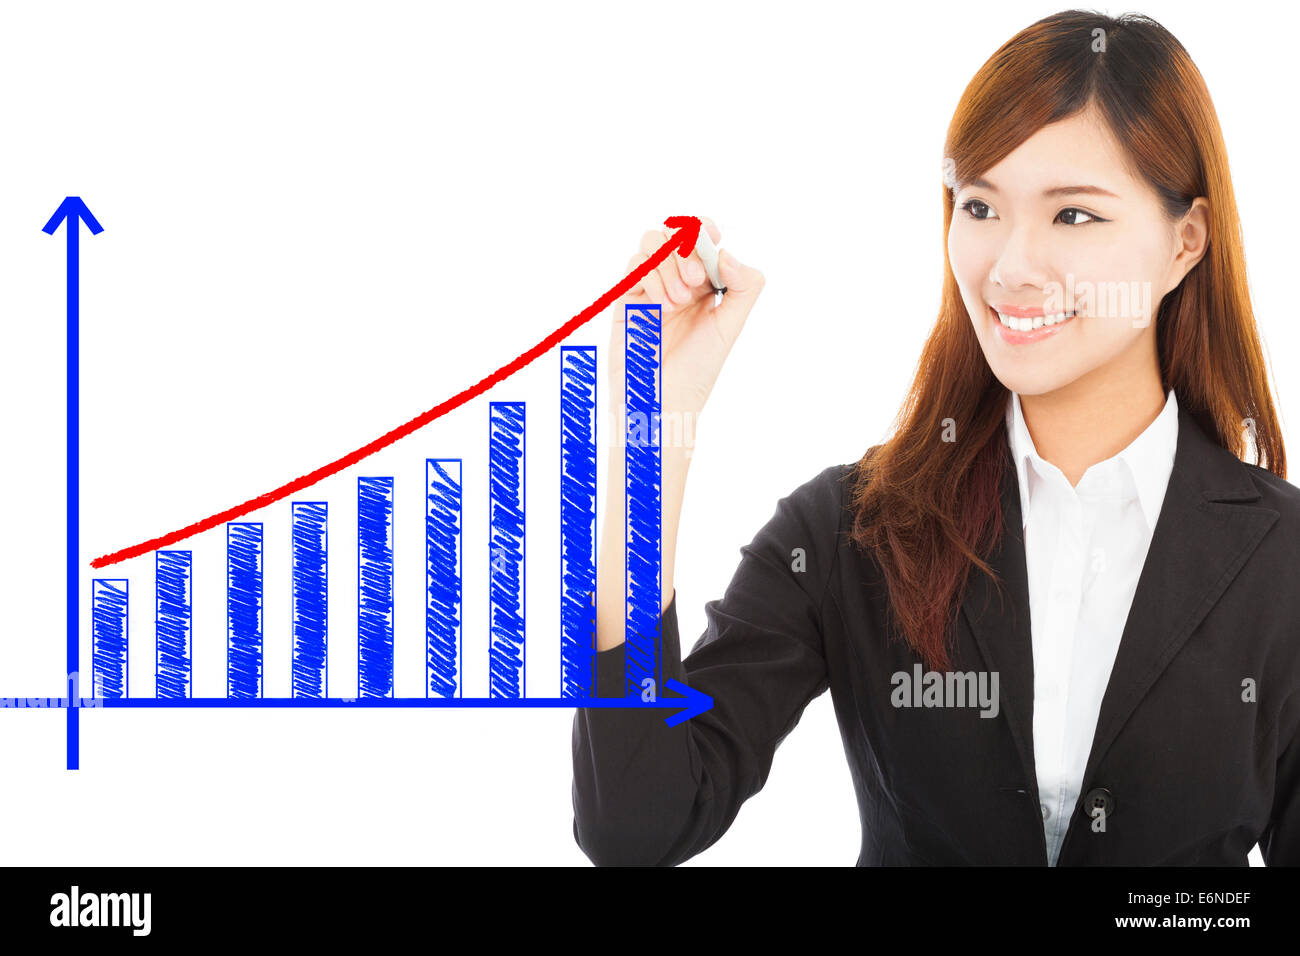 businesswoman draw a marketing growth chart over white background Stock Photo